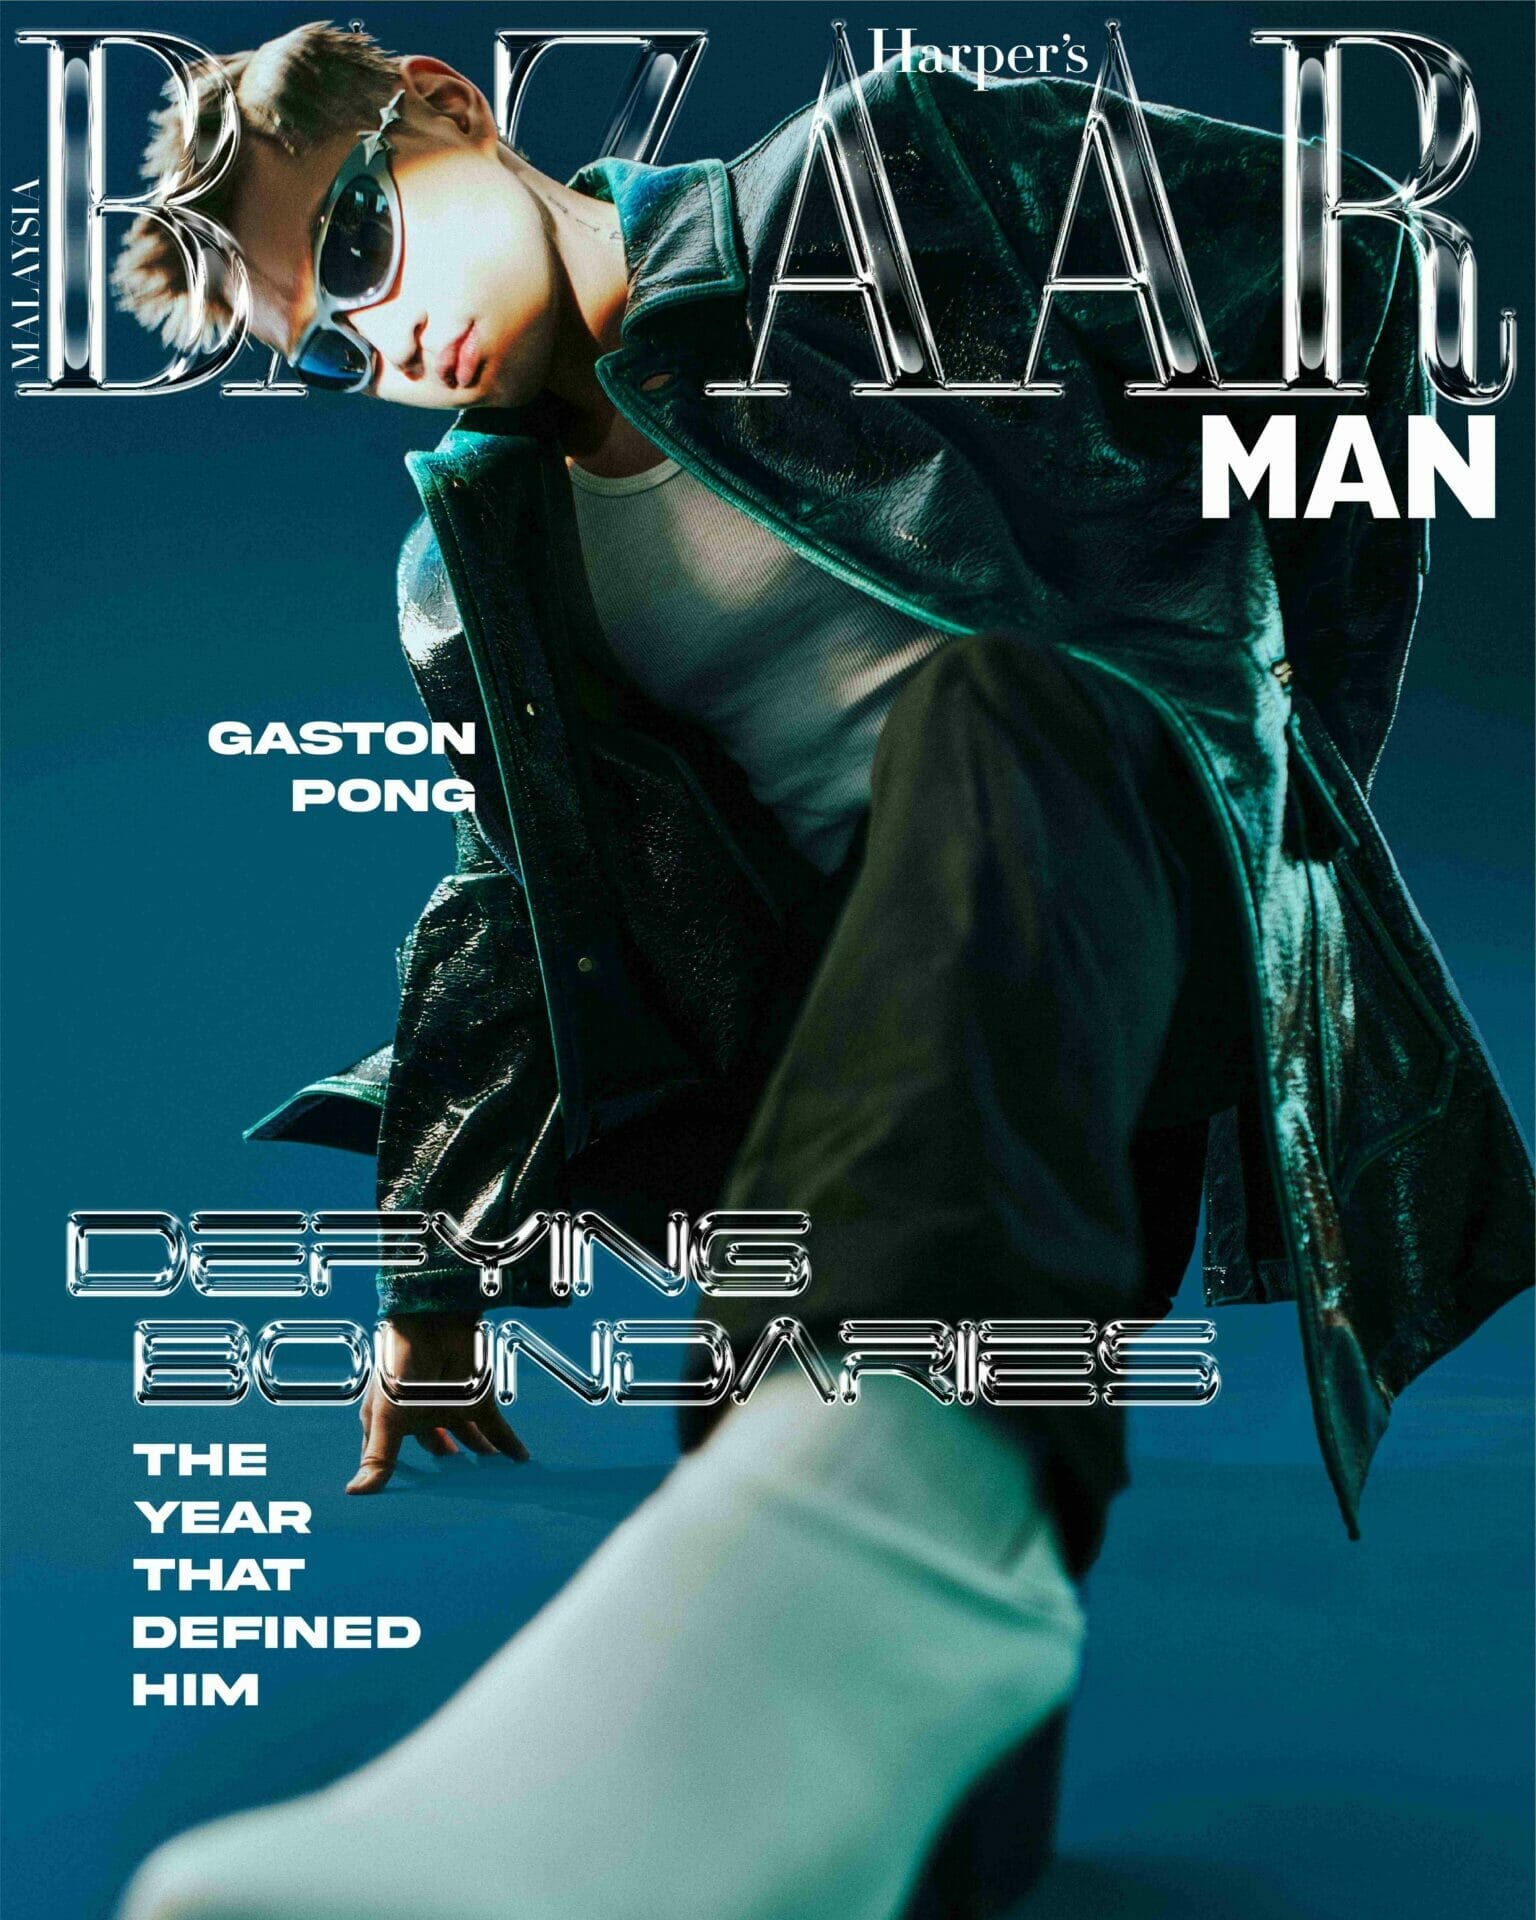 Gaston Pong on the Cover of BAZAARMan.